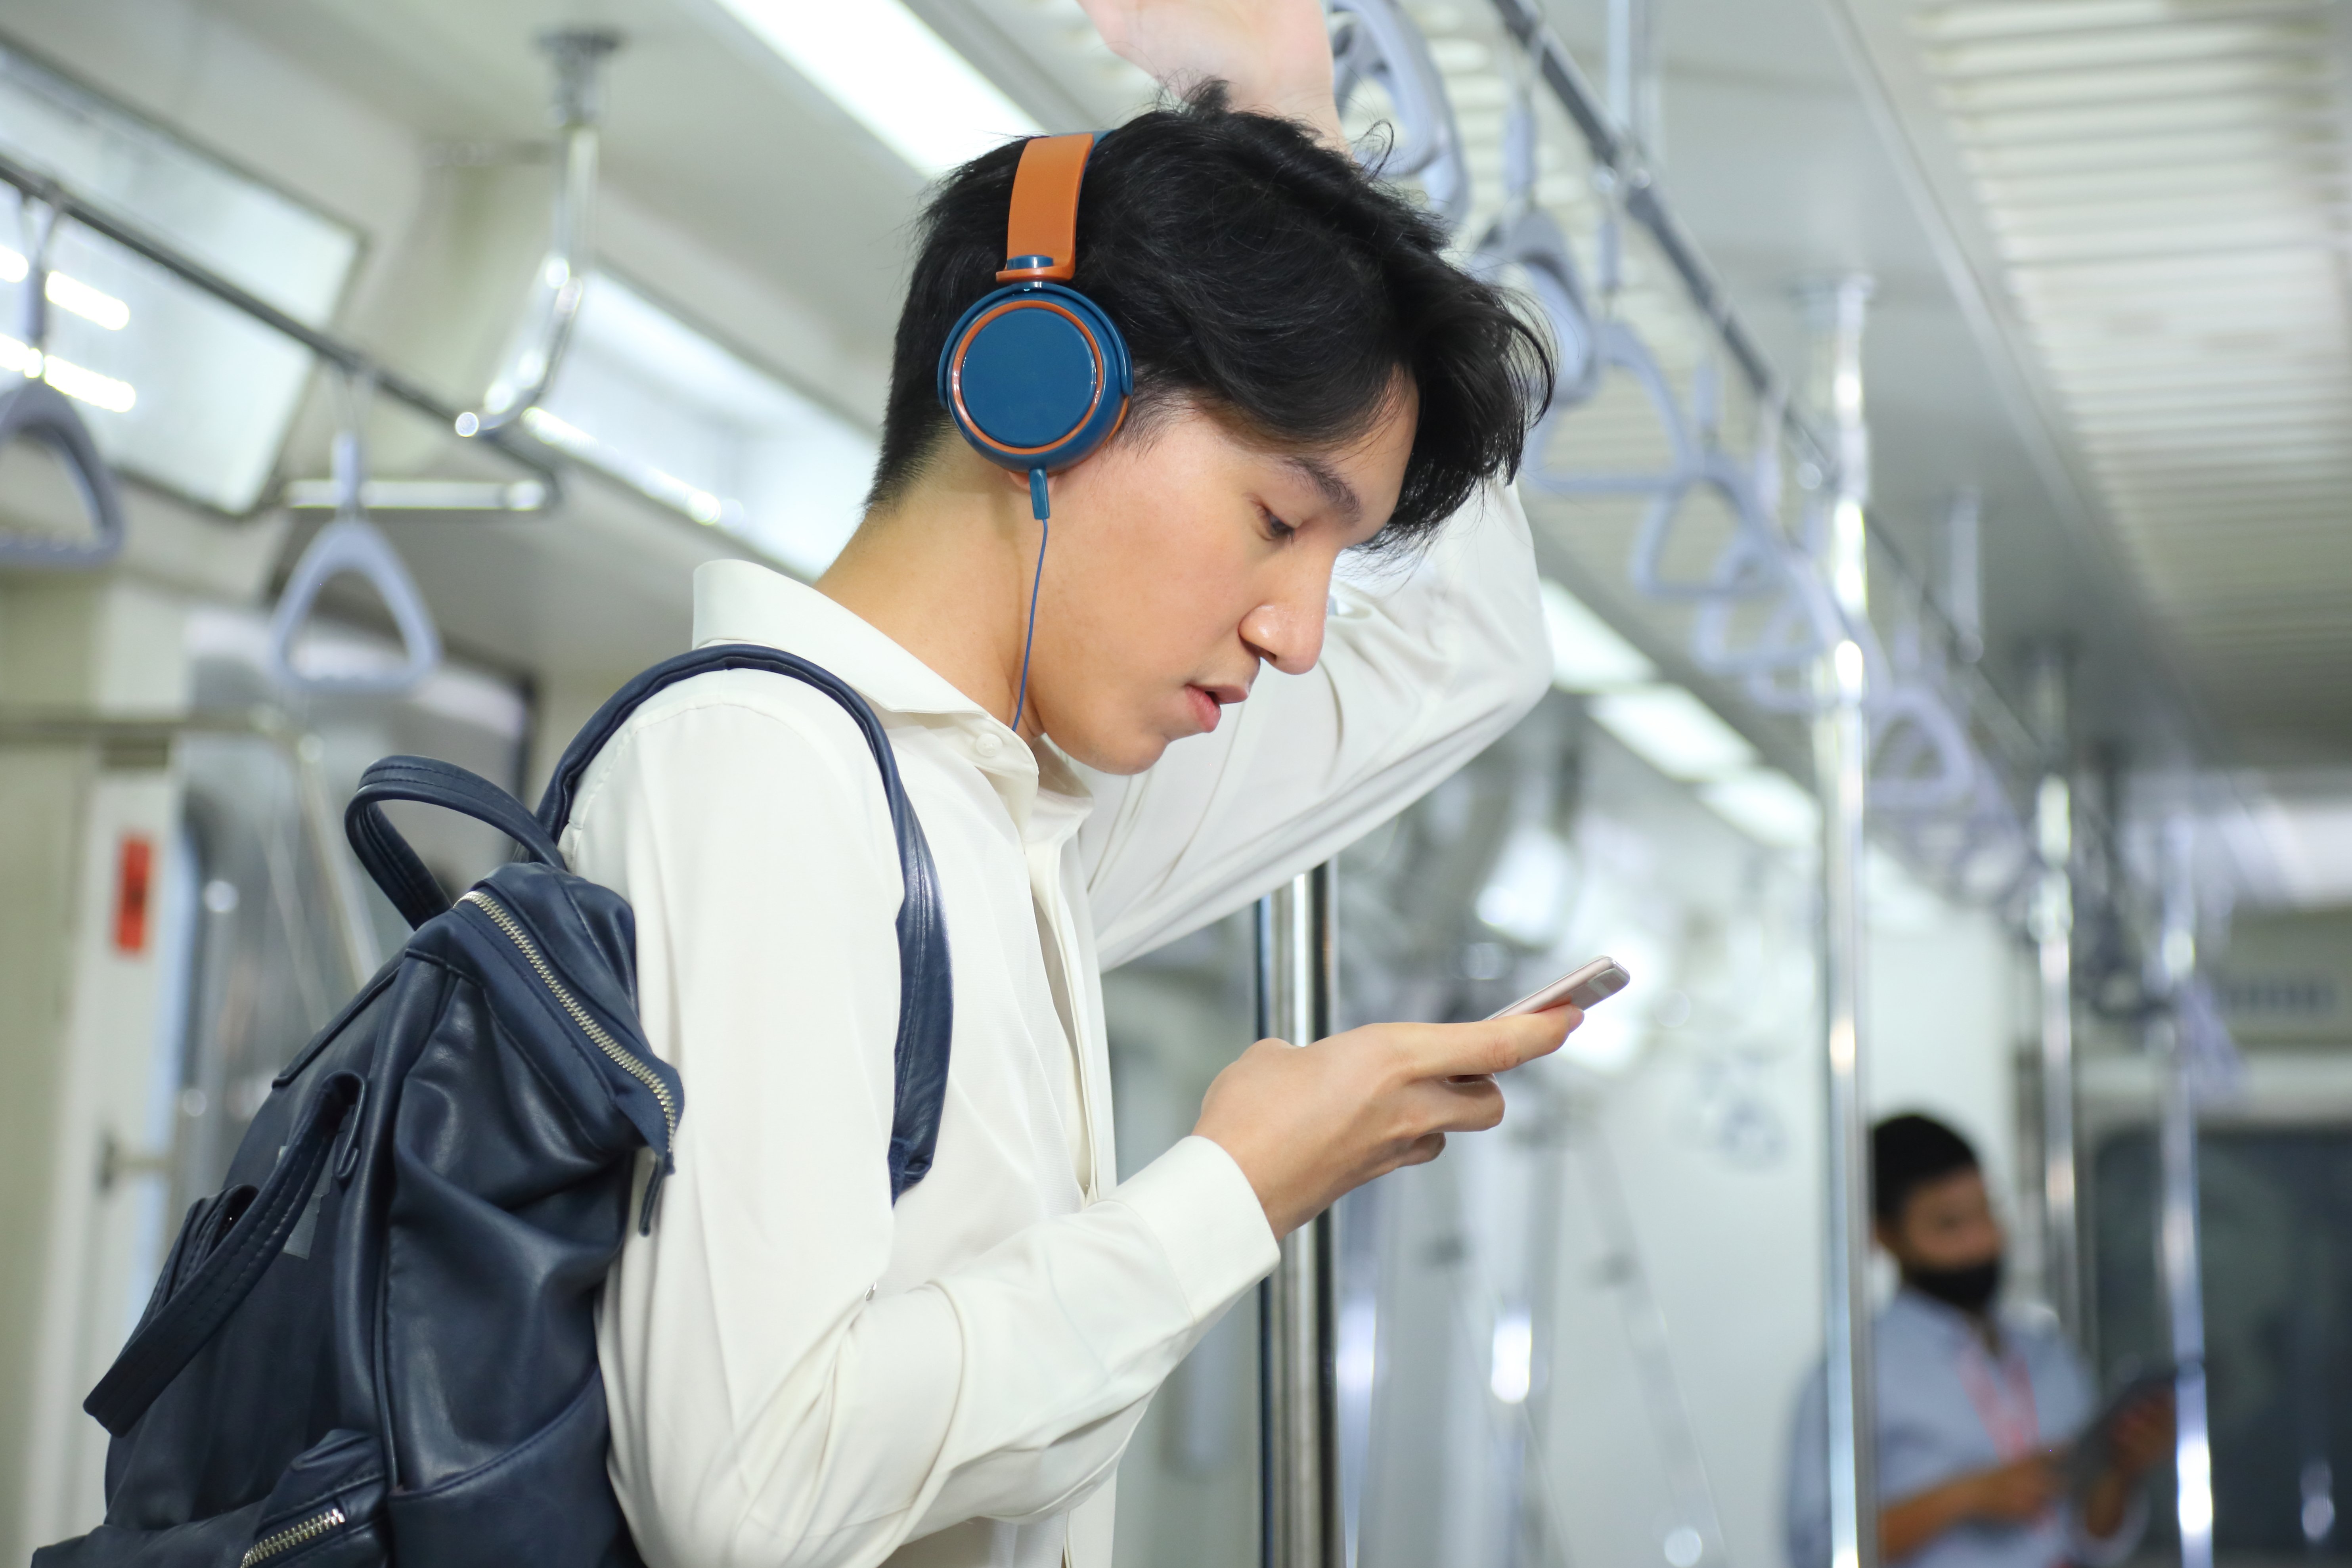 Student on subway wearing headset and watching phone